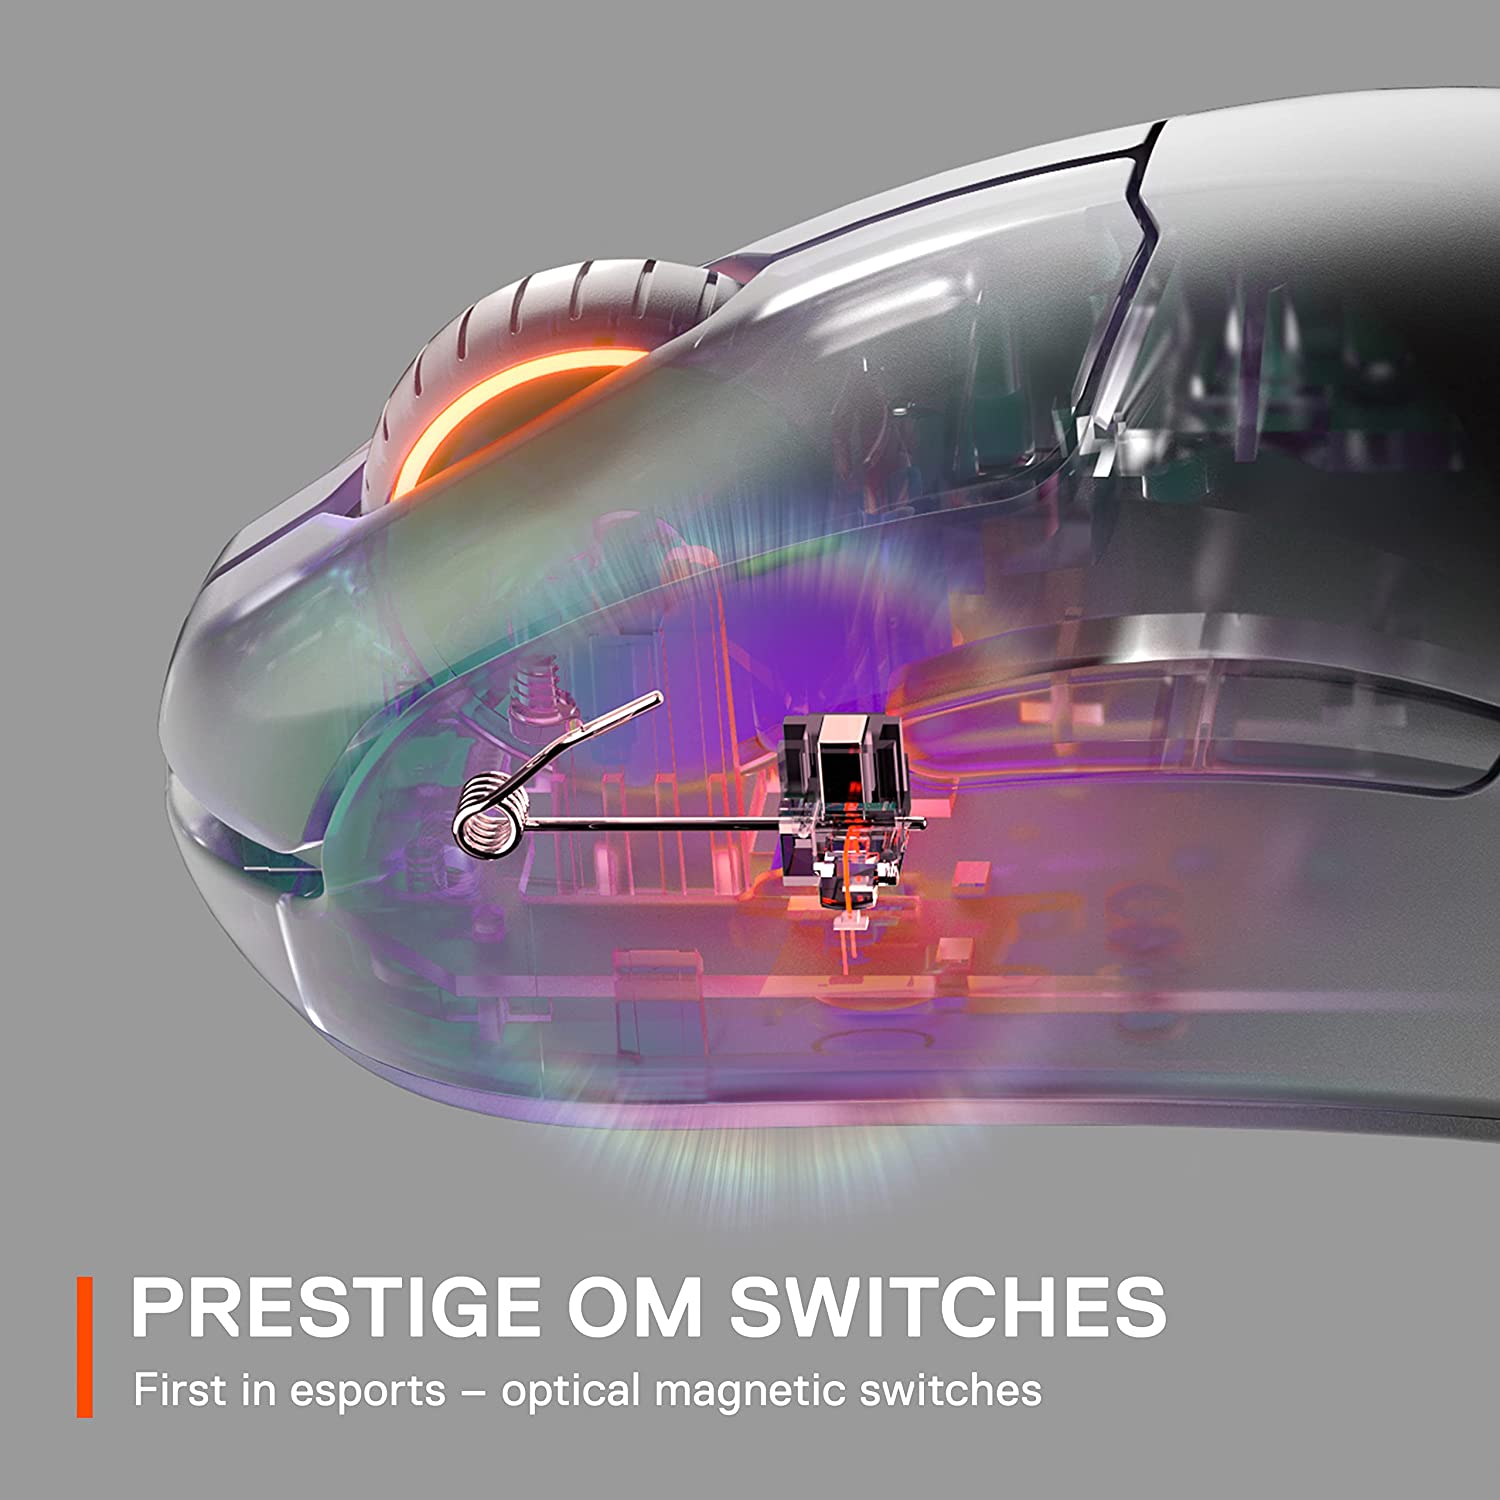 SteelSeries Prime FPS Gaming Mouse with TrueMove Pro Optical Sensor